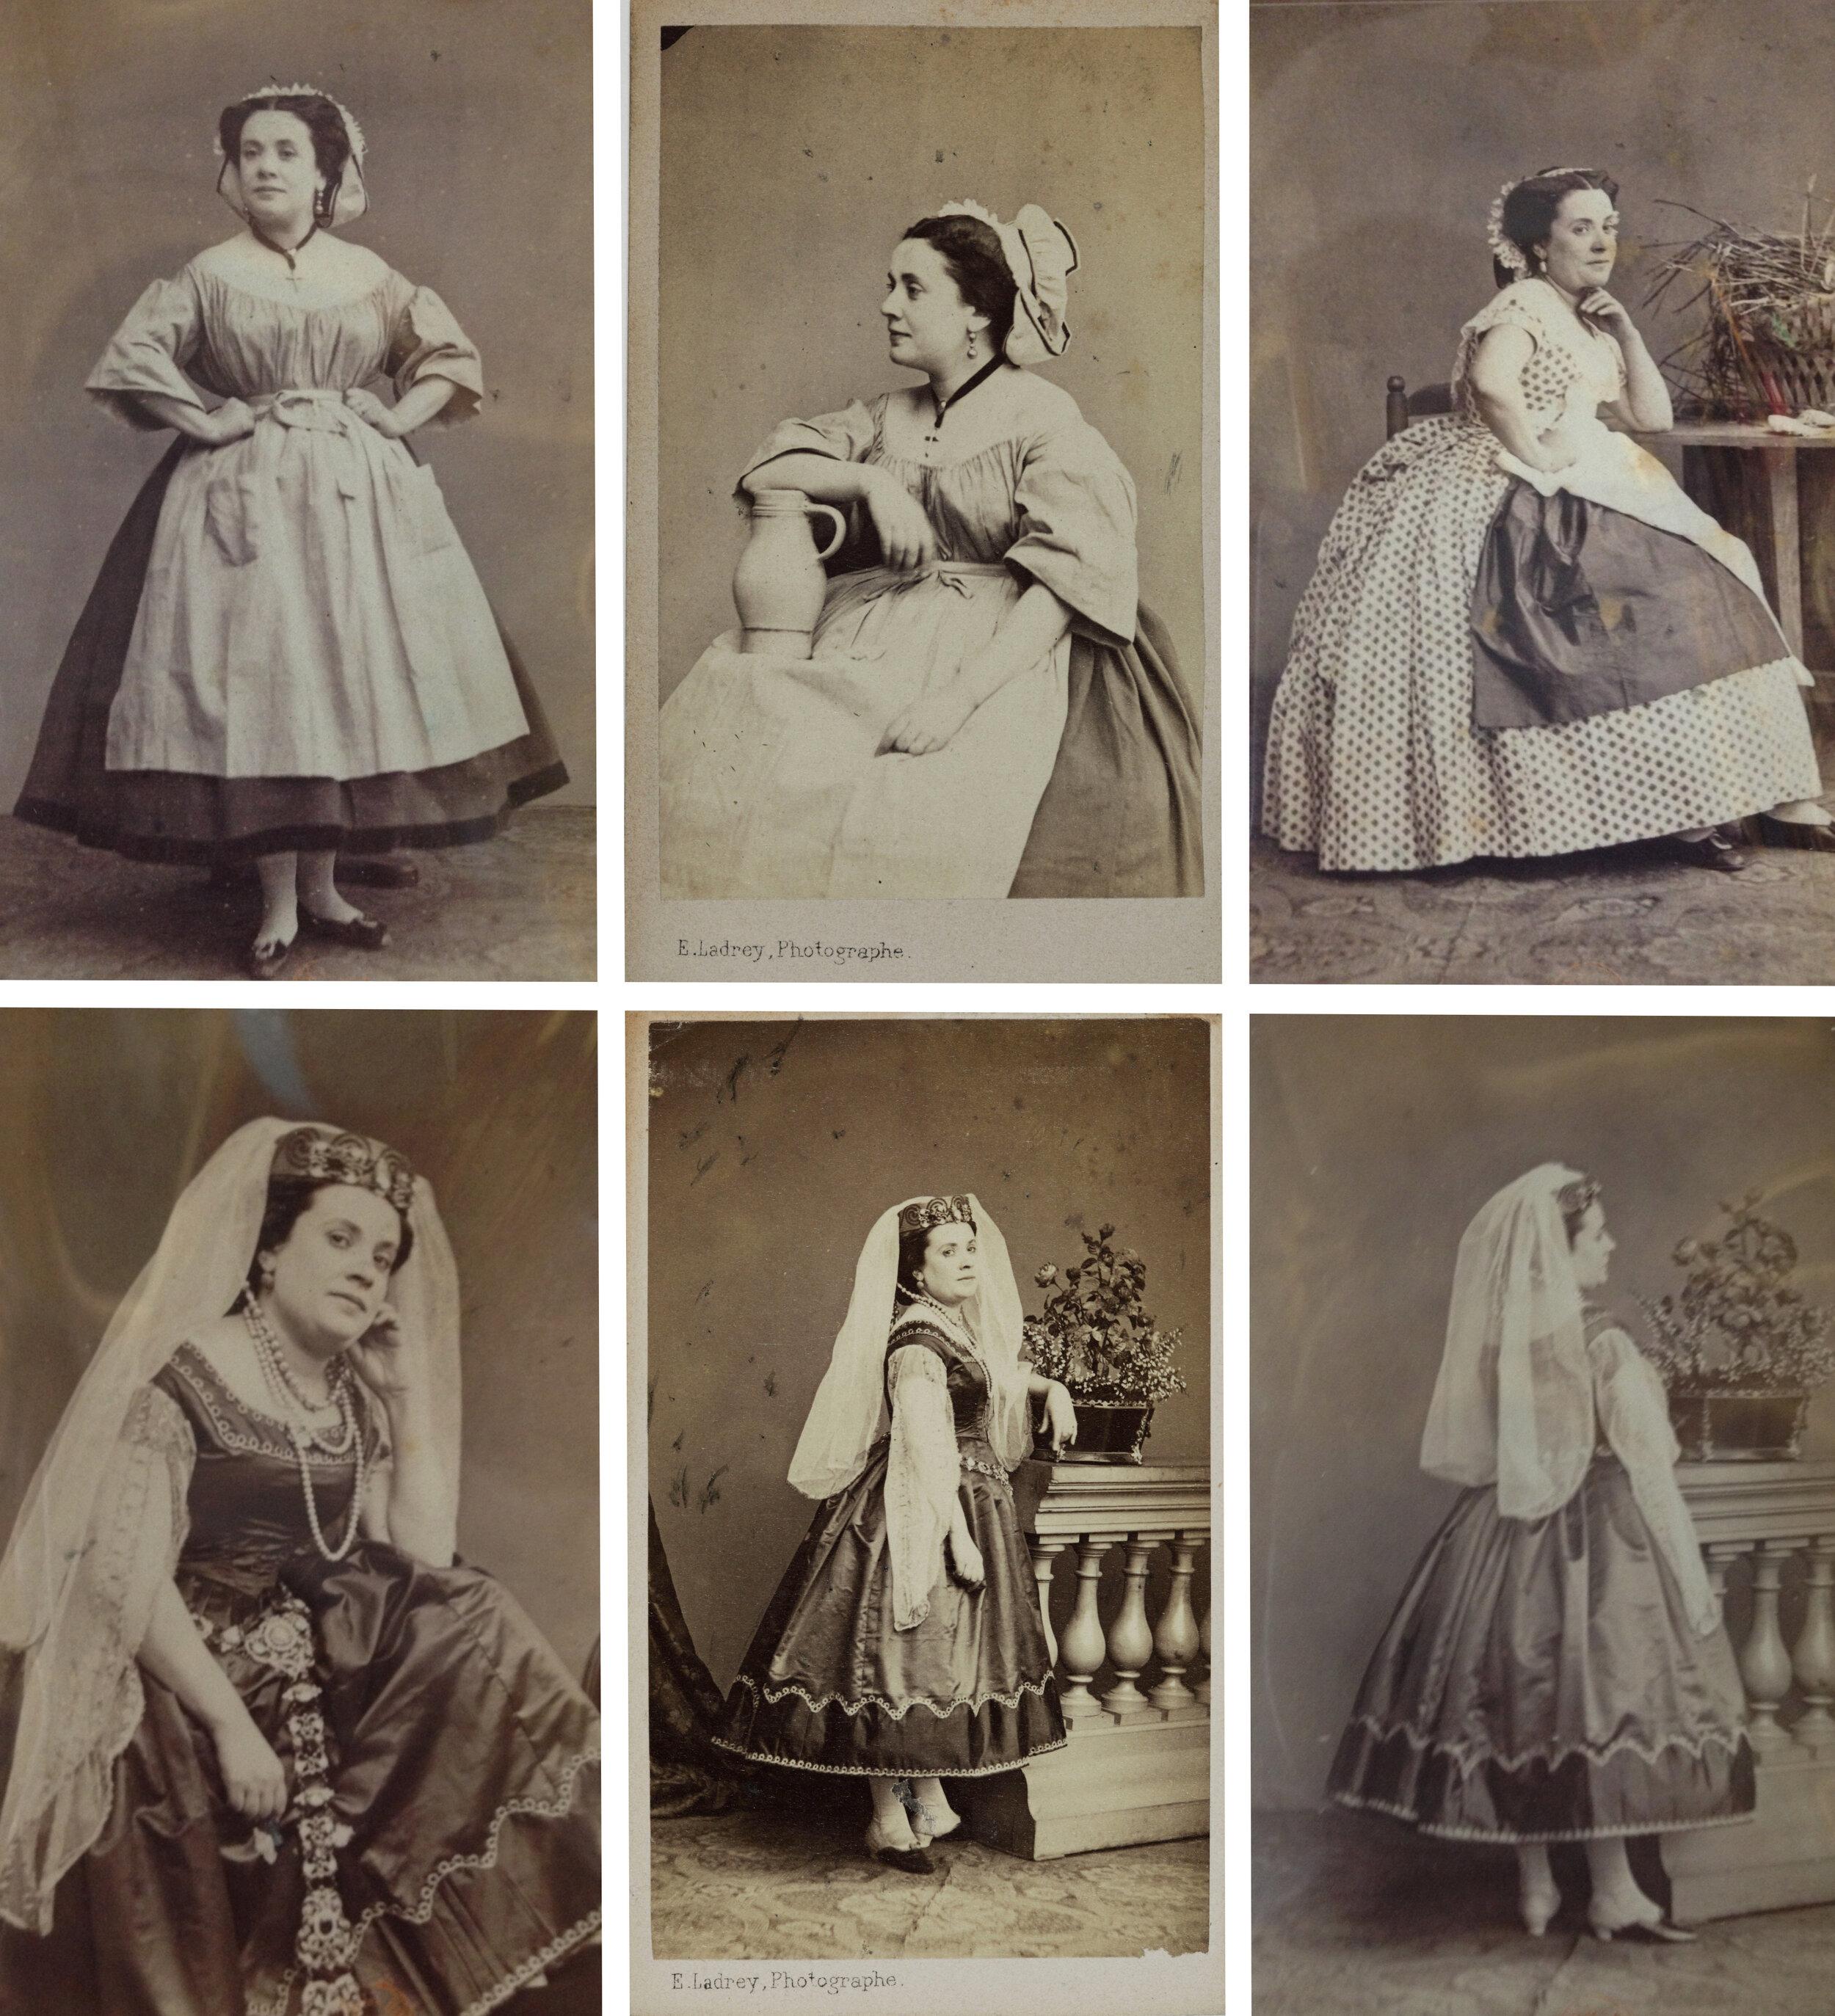 Portraits of Andrieux, actress, by Ernest Ladrey c. 1864. Center photos courtesy of Musée Carnavalet (source, source). Photos to the left and right courtesy of Bibliothèque National de France. Photos by me.